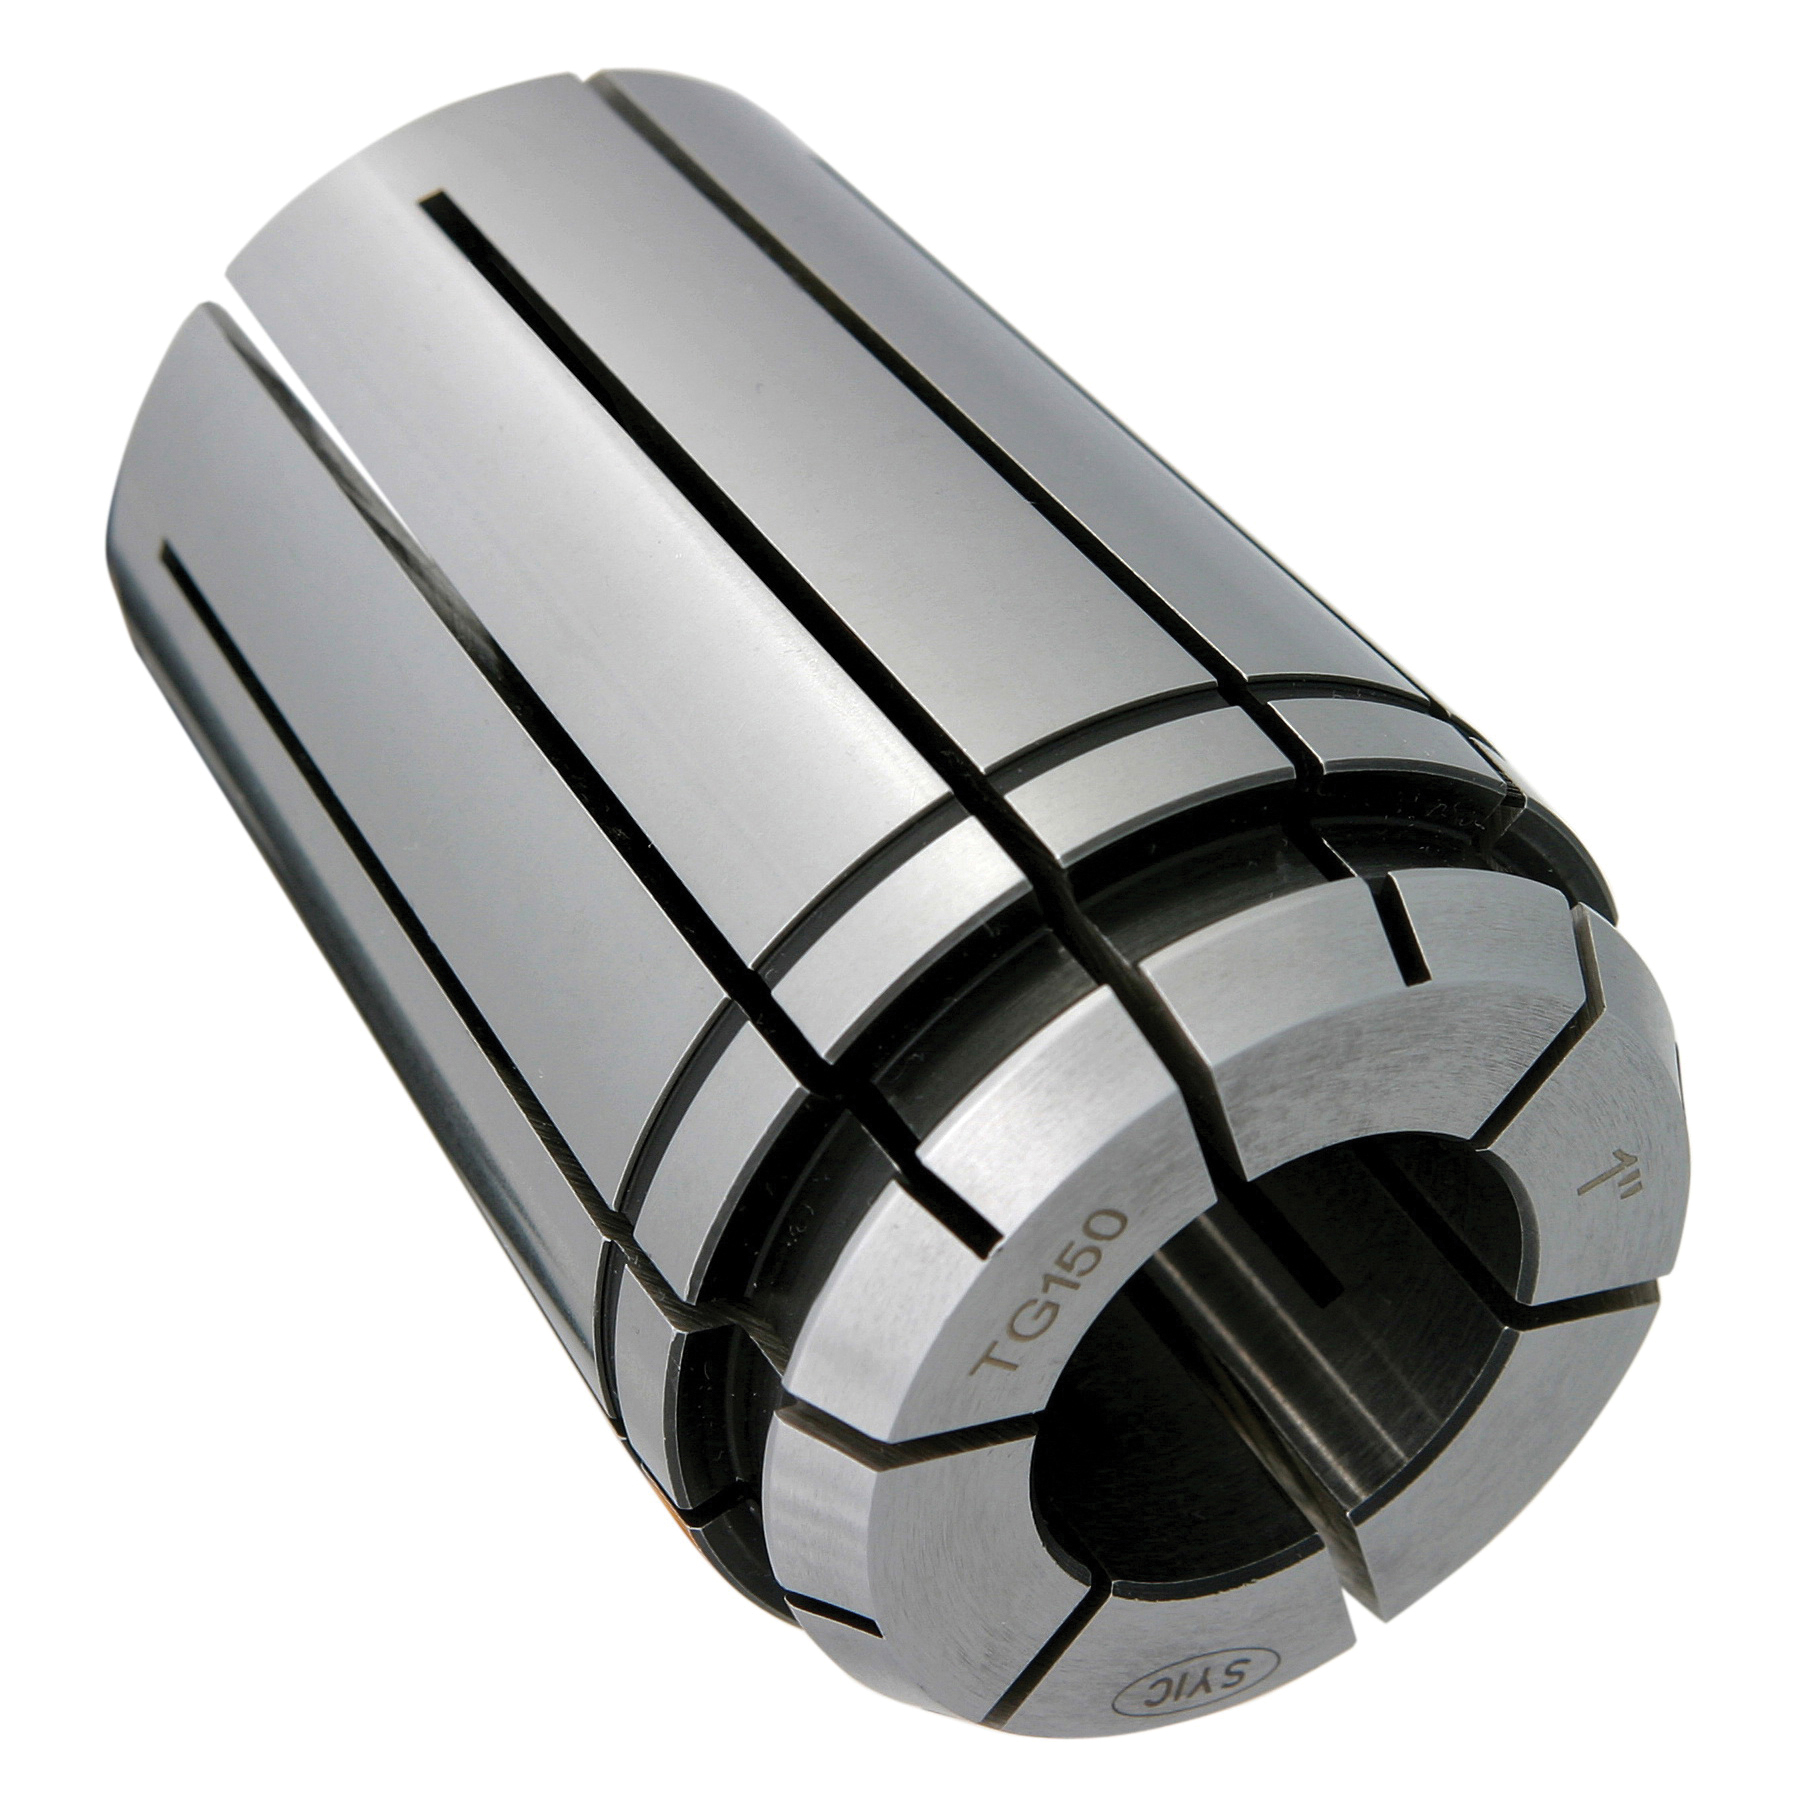 TG150 1-19/64" COLLET